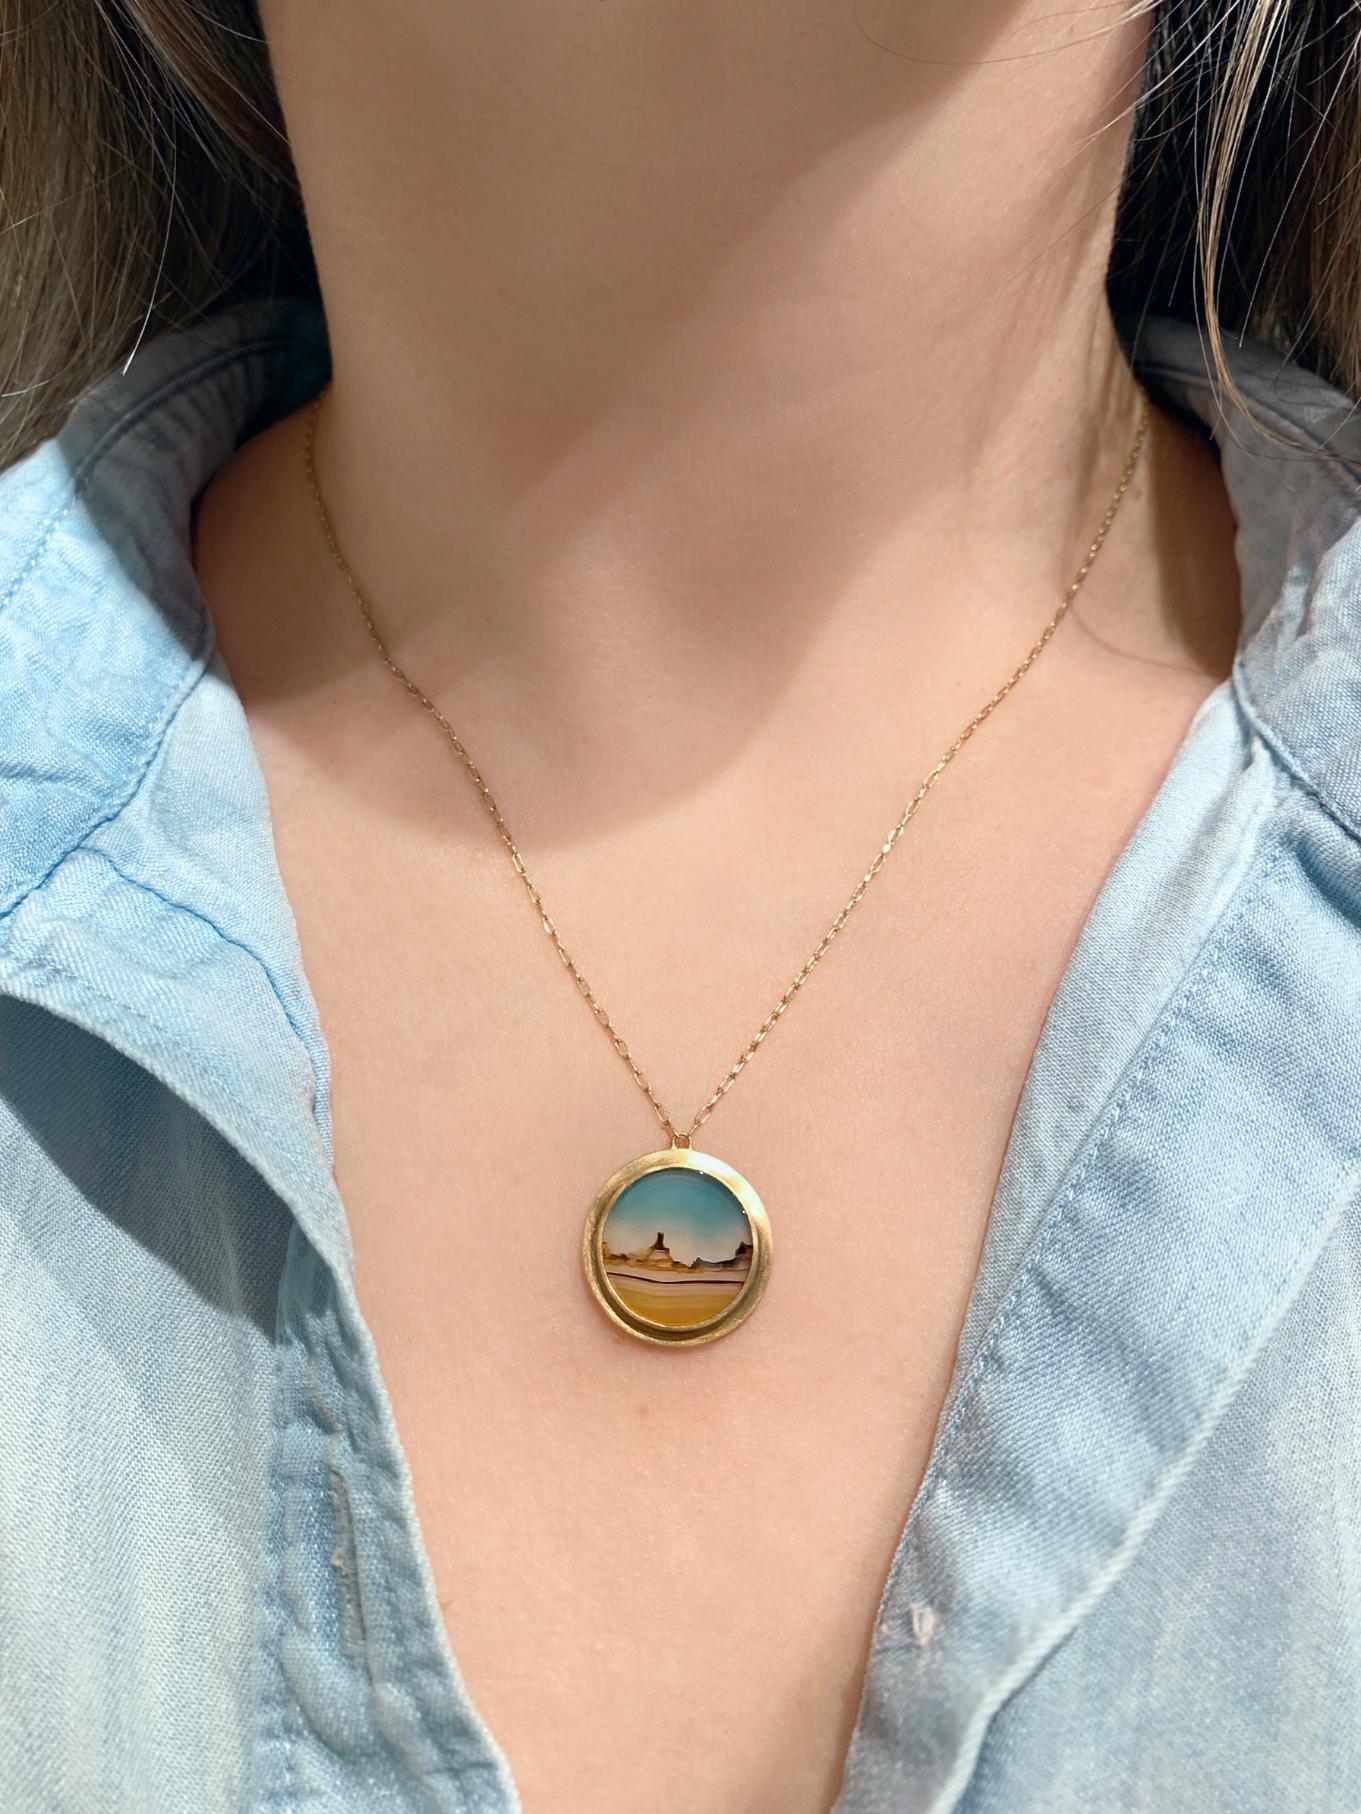 One of a Kind Landscape Agate Necklace hand-fabricated in Japan by jewelry designer Shinobu Marotta of the renowned Talkative Atelier, showcasing a spectacular and picturesque, completely natural round landscape agate bezel-set perfectly in the